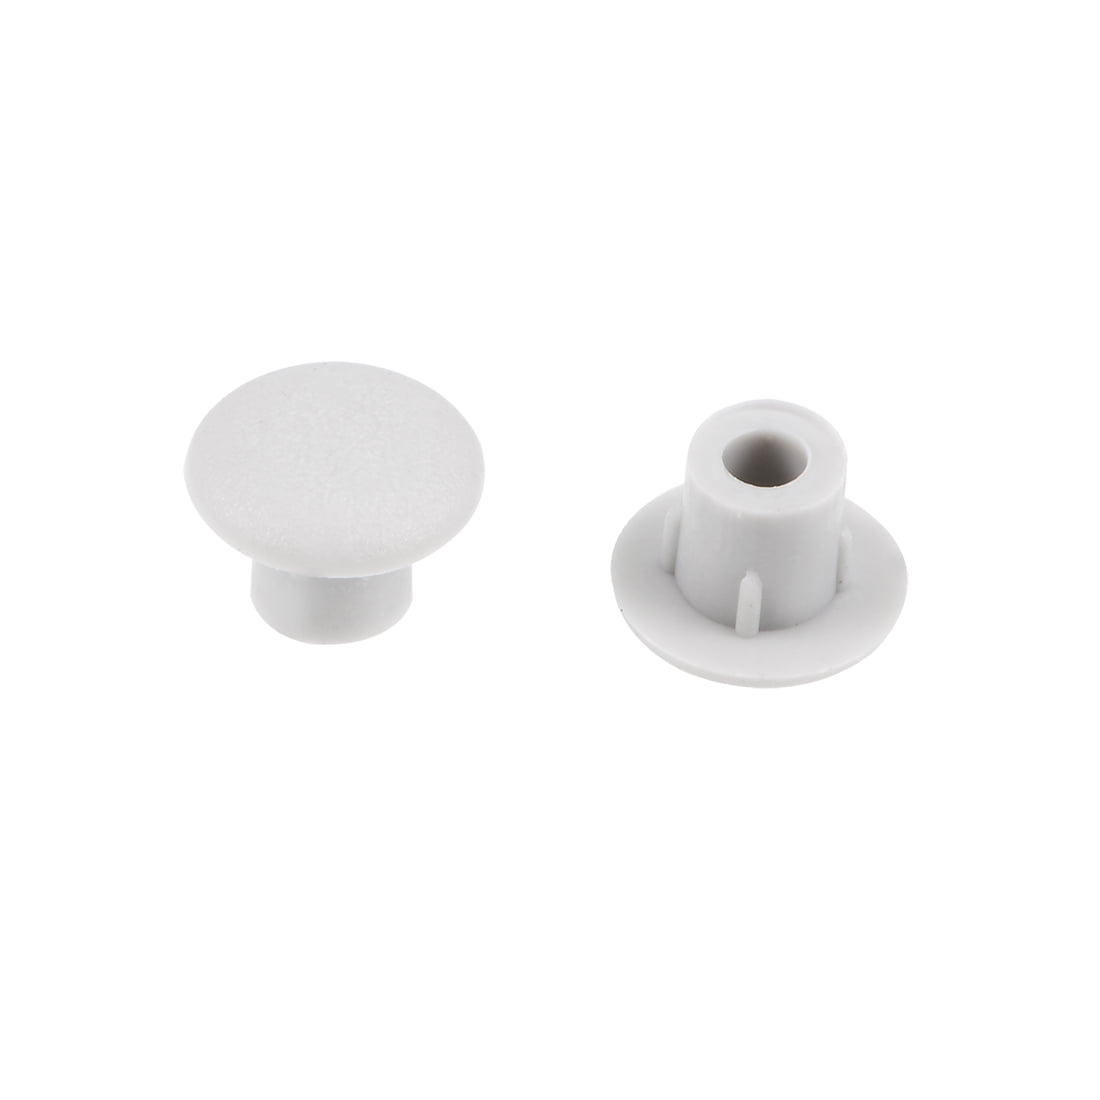 50Pcs Screw Caps Covers Flush Type Hole Plugs Button Tops for Cupboard Shelf USA 